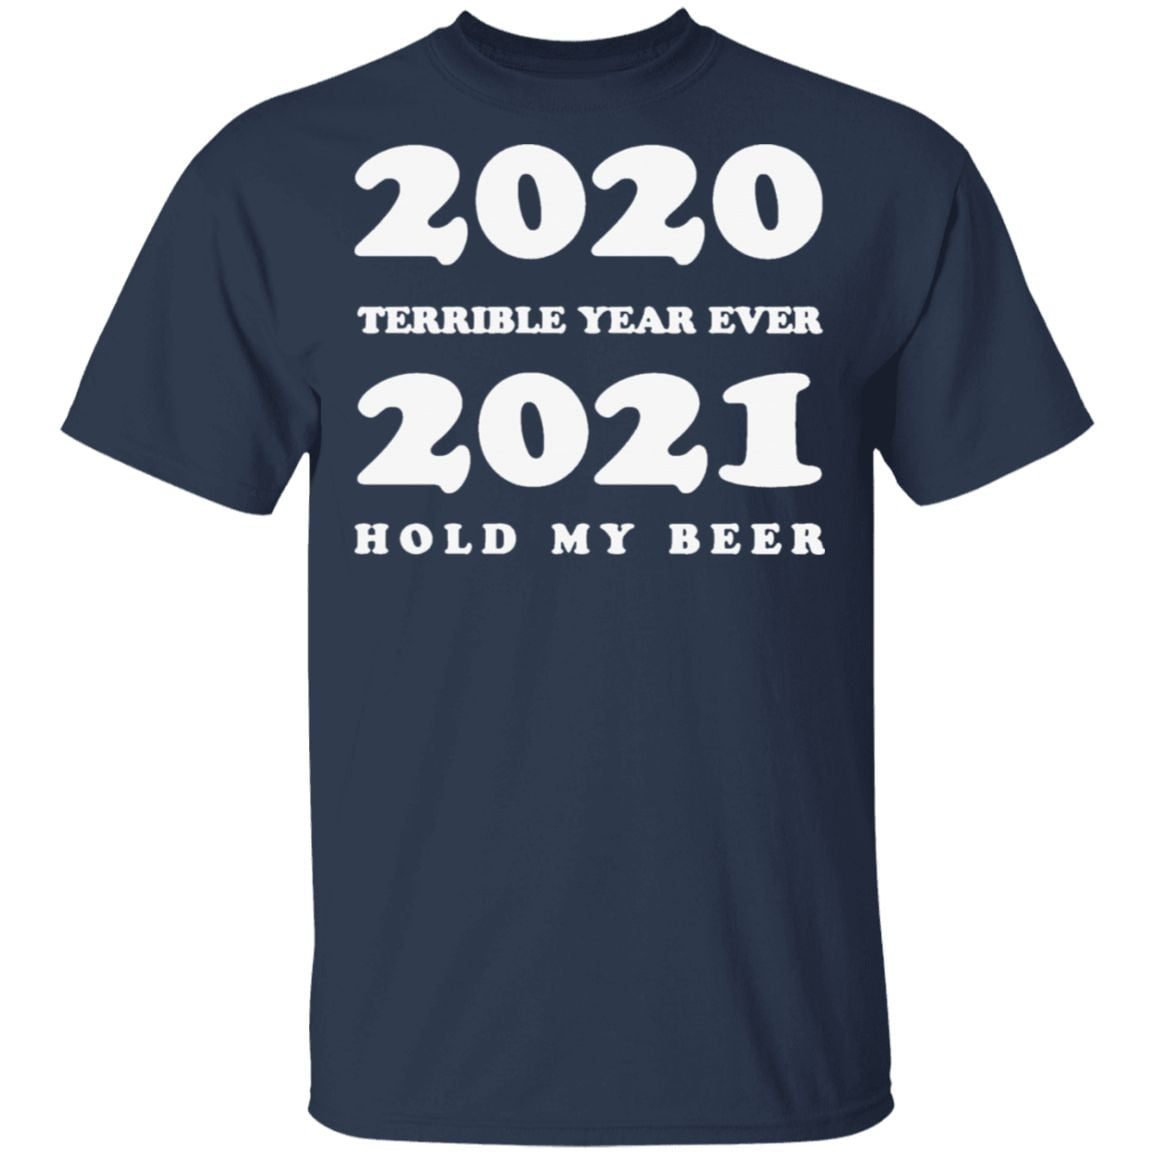 2020 Terrible Year Ever 2021 Hold My Beer T Shirt